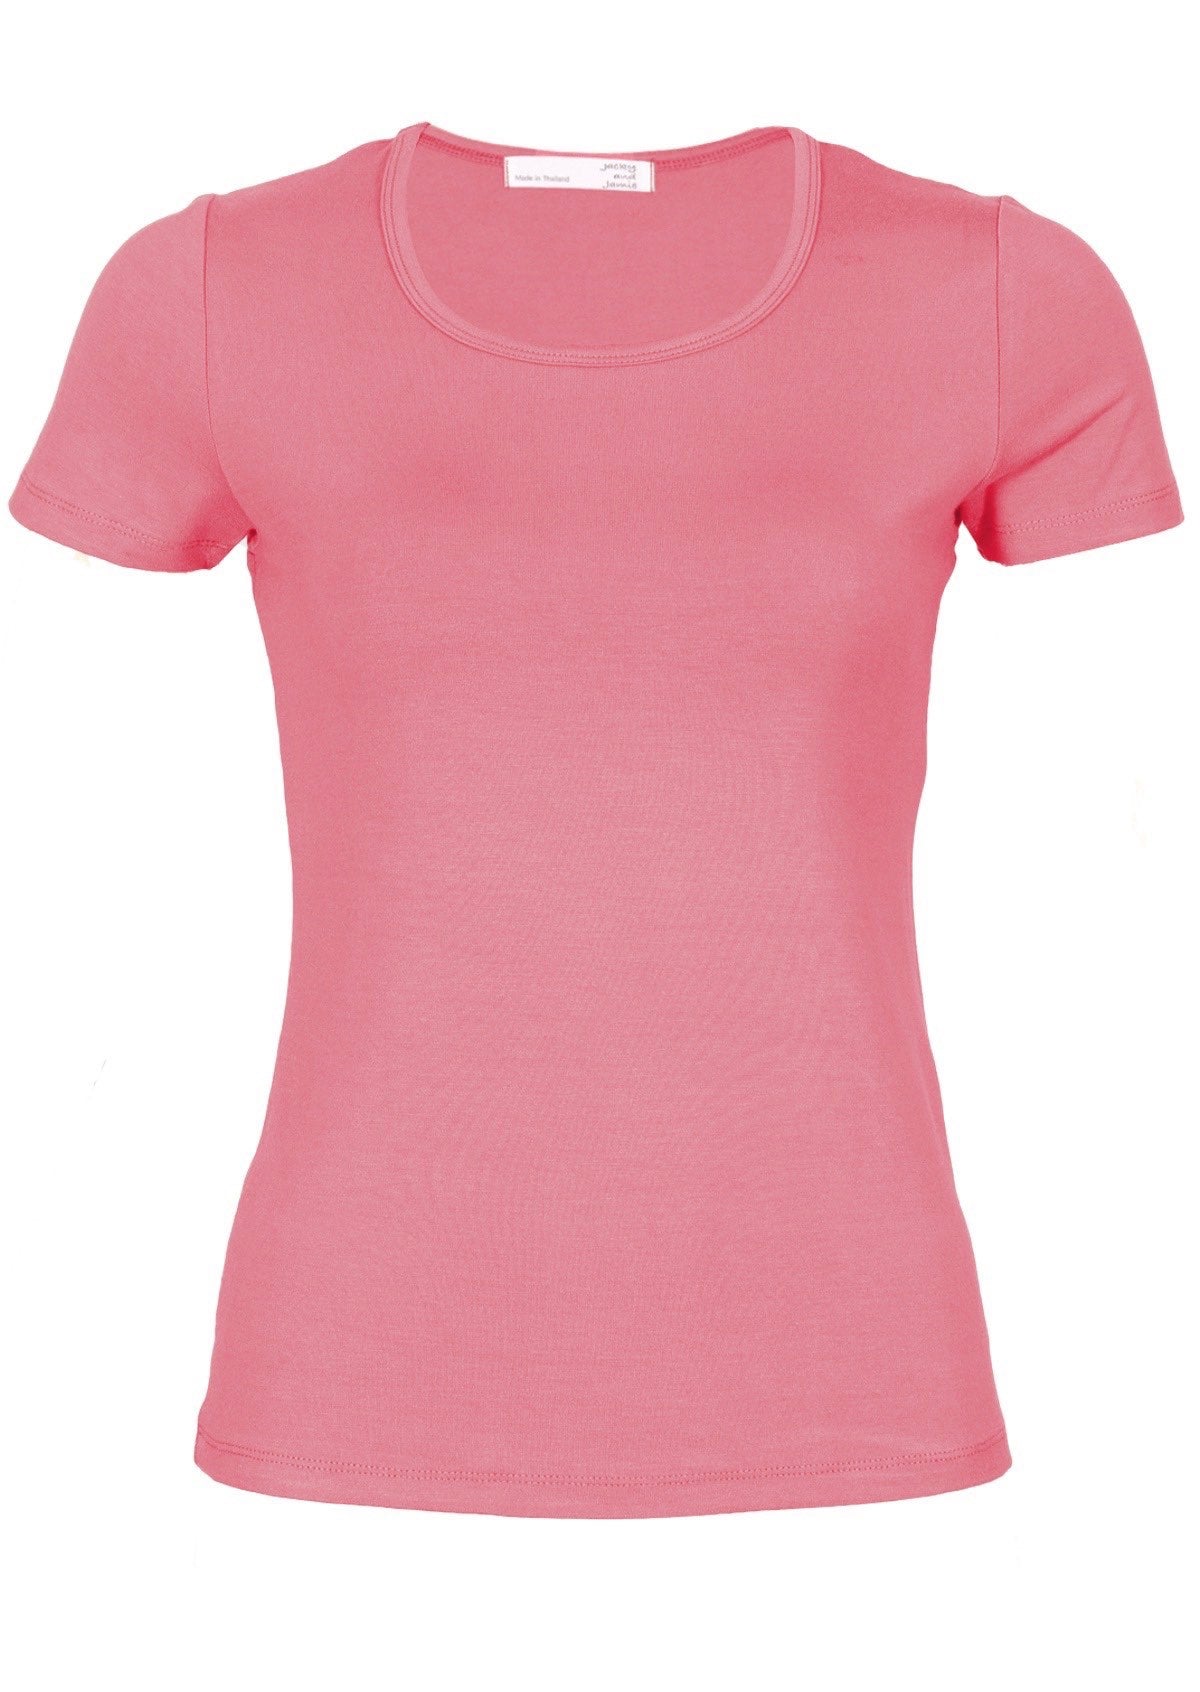 Front view women's scoop neck pink rayon fitted t-shirt.